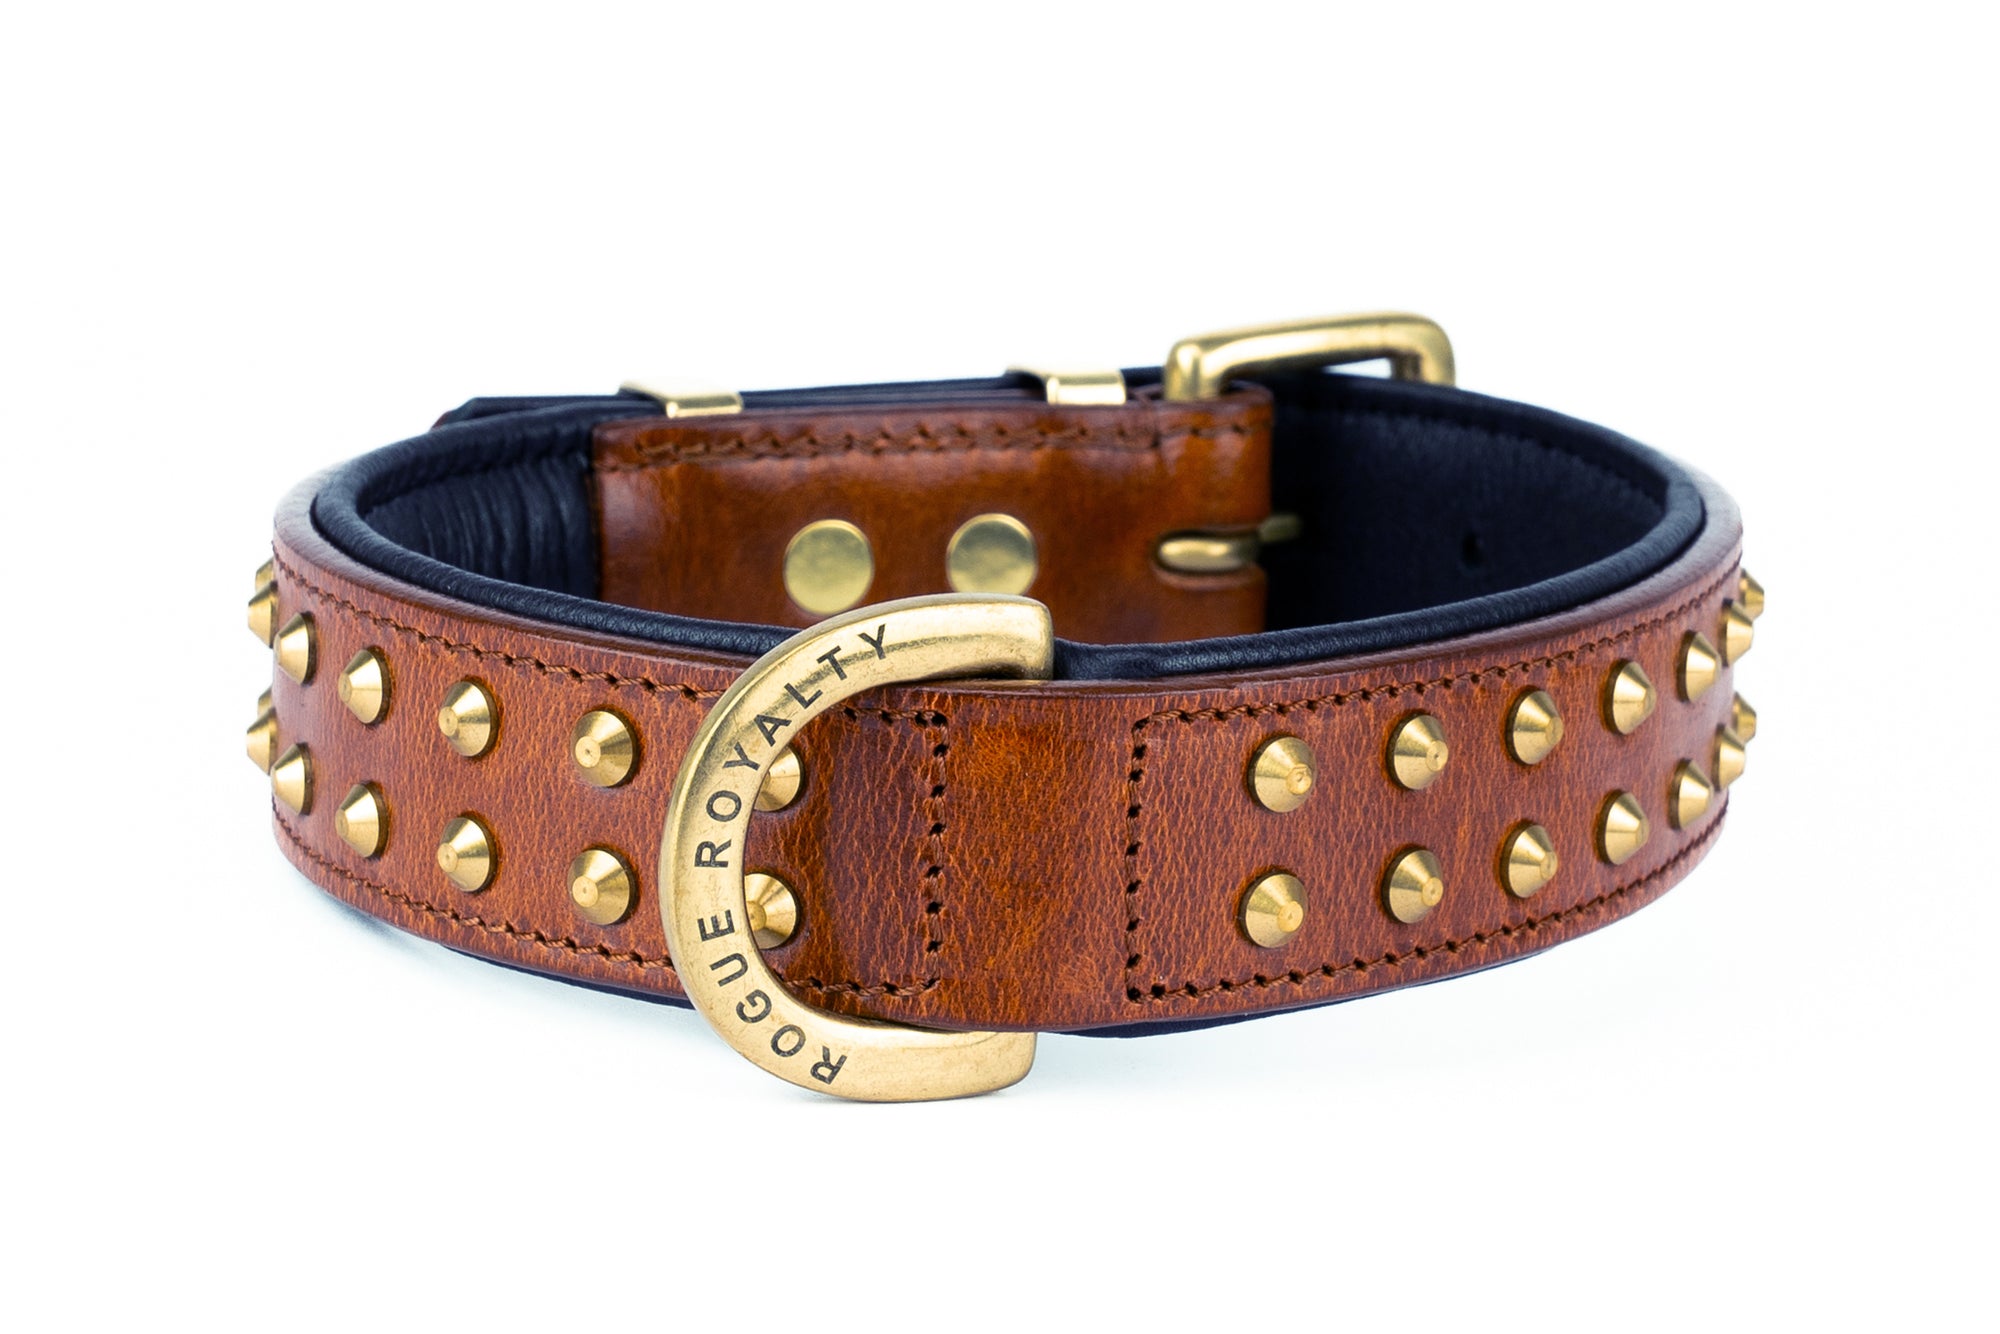 Side view of hand made brown leather dog collar with brass studs and fittings.